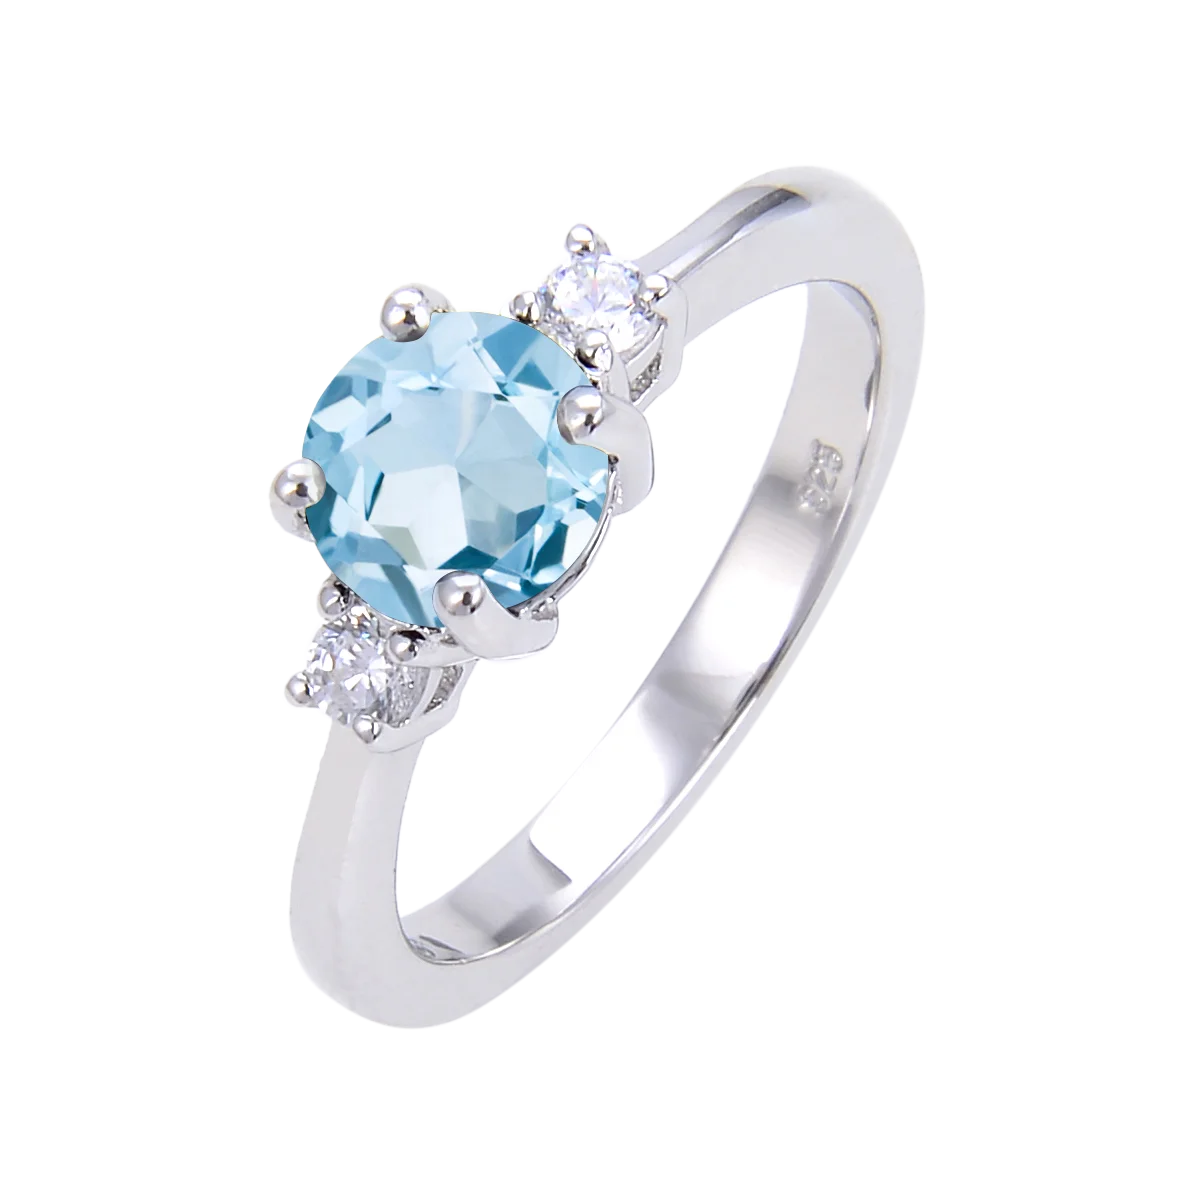 

Abiding Wholesale 925 Sterling Silver Natural Sky Blue Topaz Gemstone Ring Jewellery Women